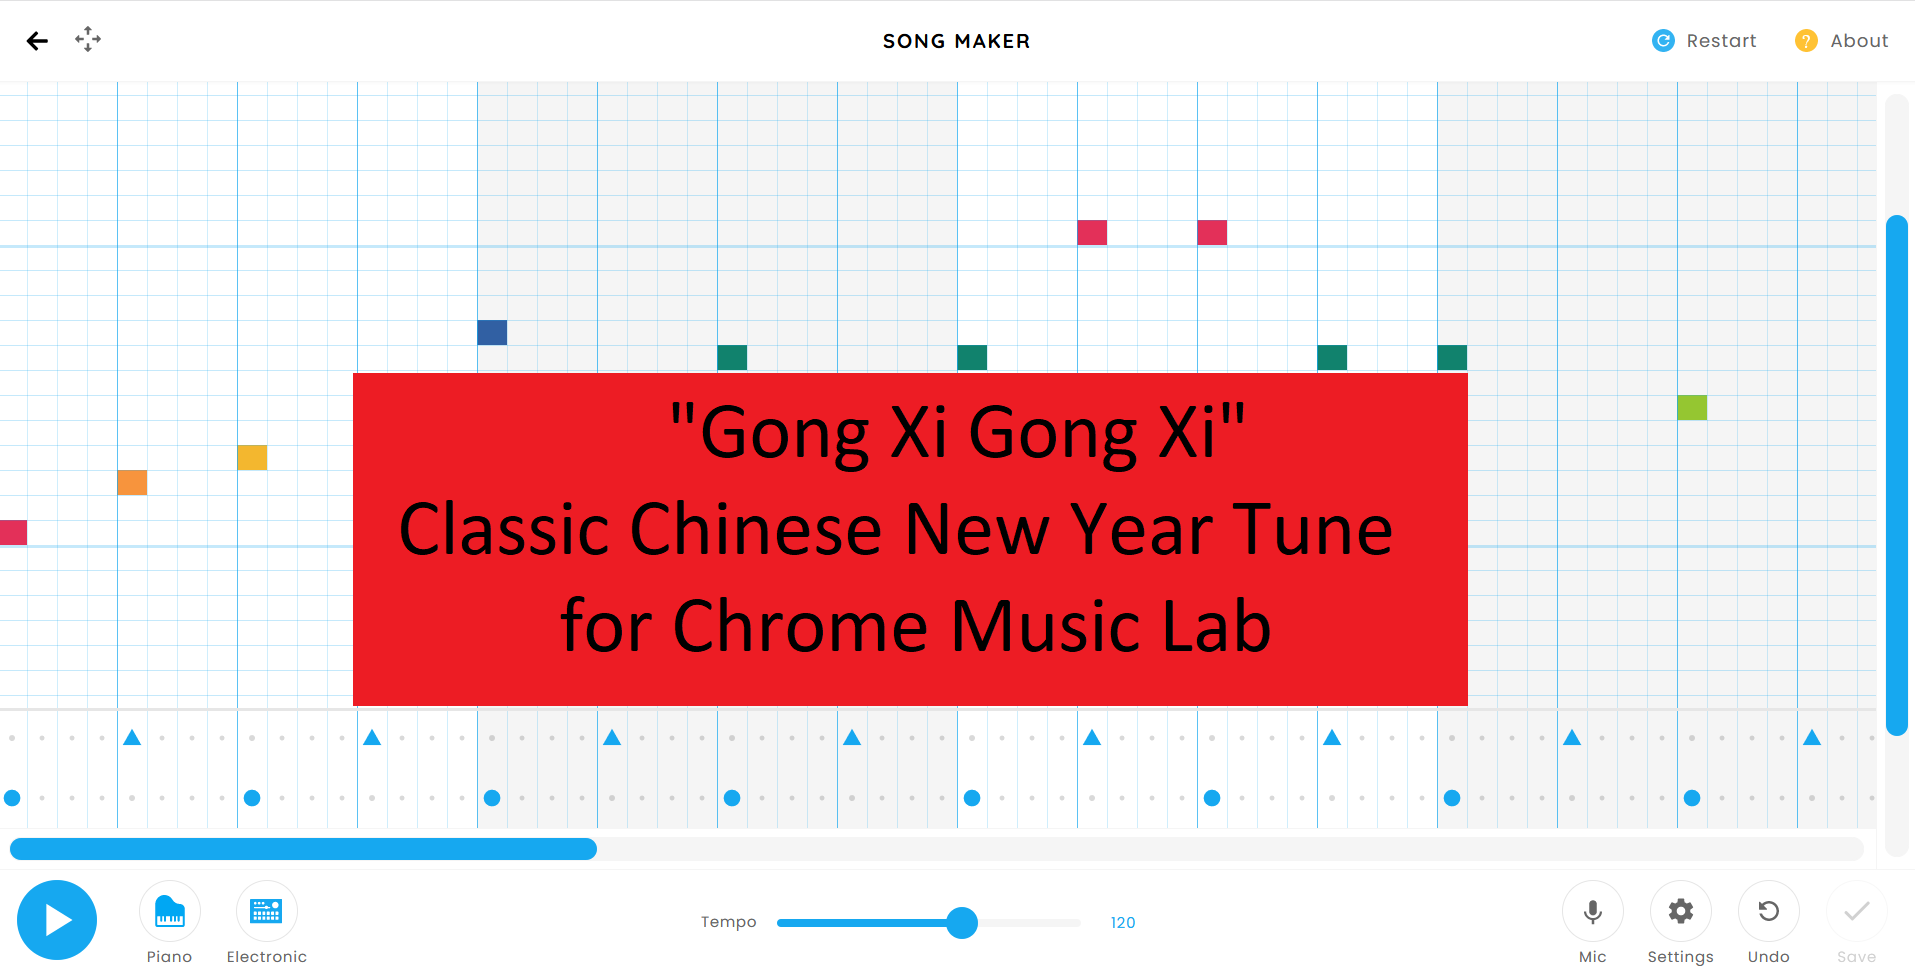 Gong Xi Gong Xi – Chinese New Year Tune for Chrome Music Lab